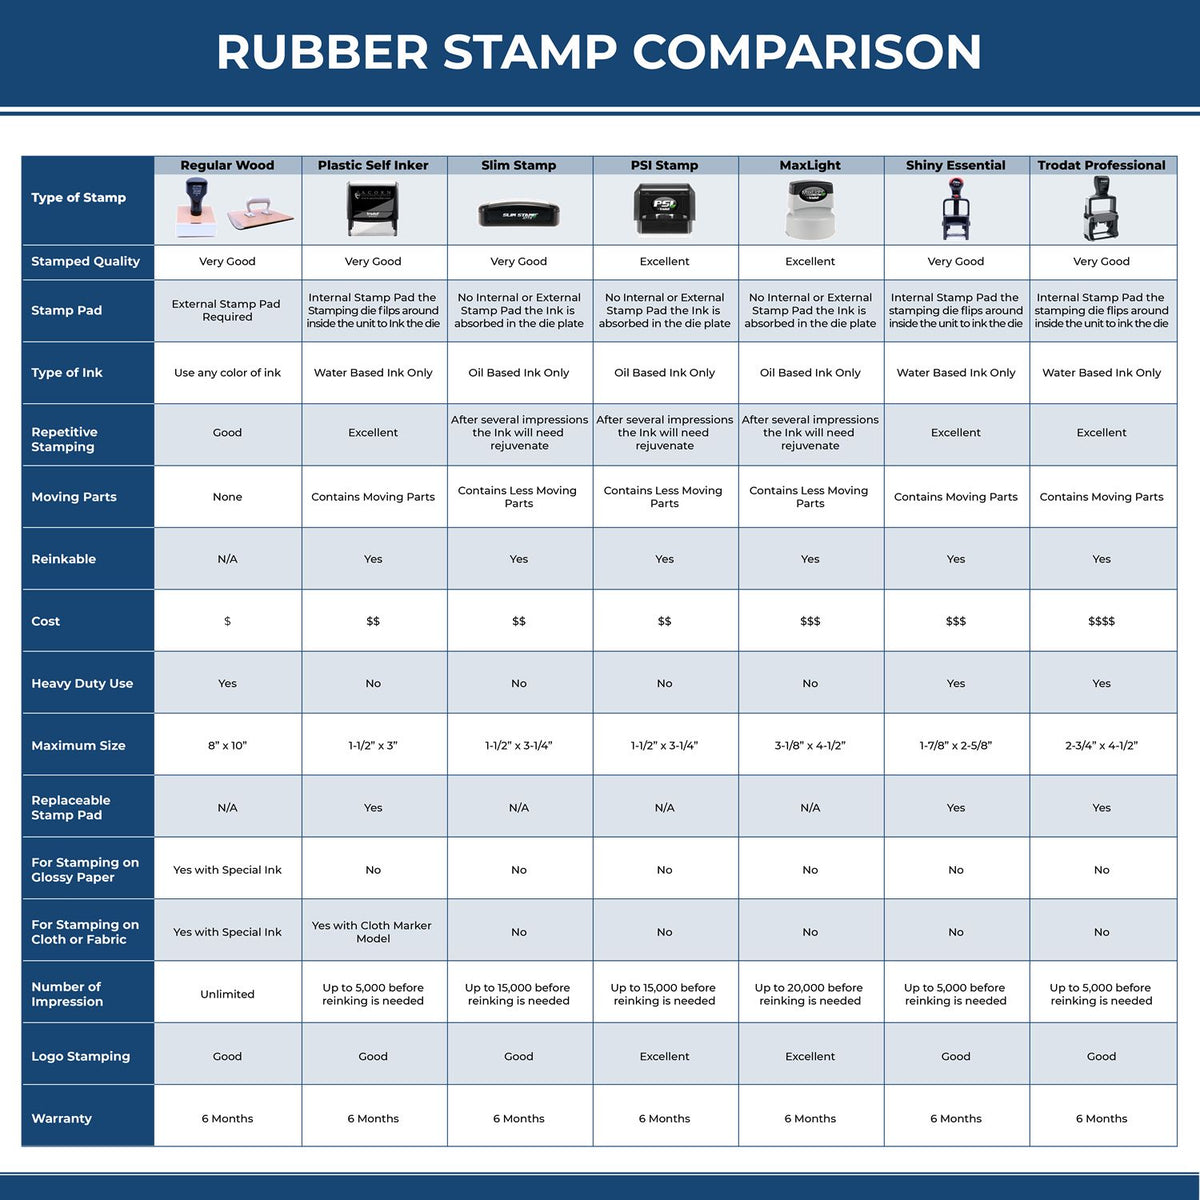 A comparison chart for the different types of mount models available for the New Hampshire Professional Engineer Seal Stamp.